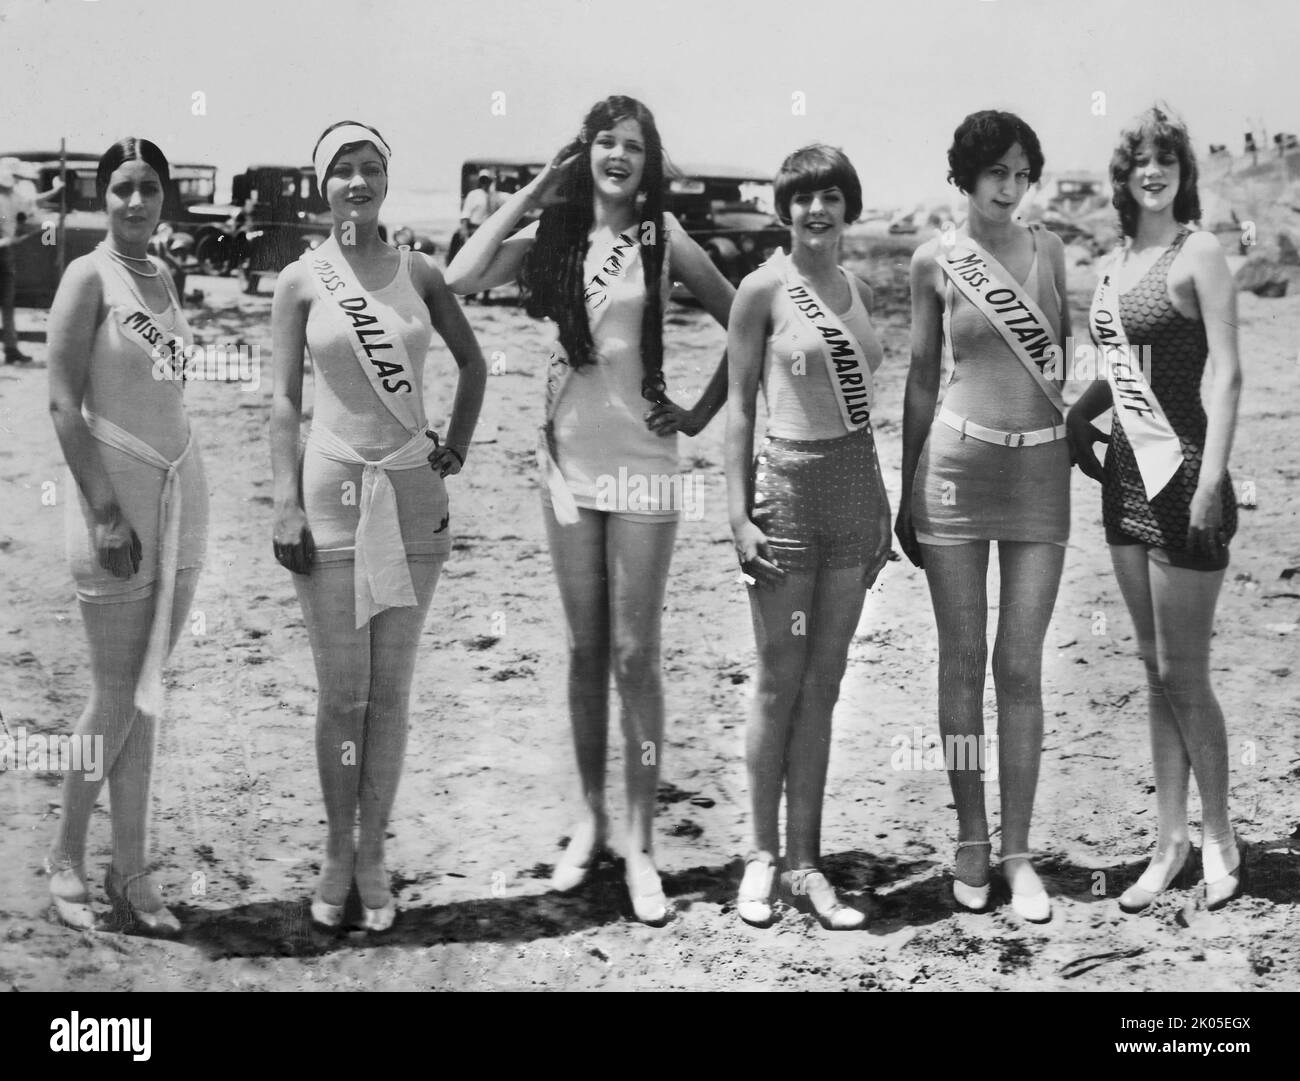 Bathing beauty pageant contestants line up on Galveston Texas beach in 1927. Stock Photo